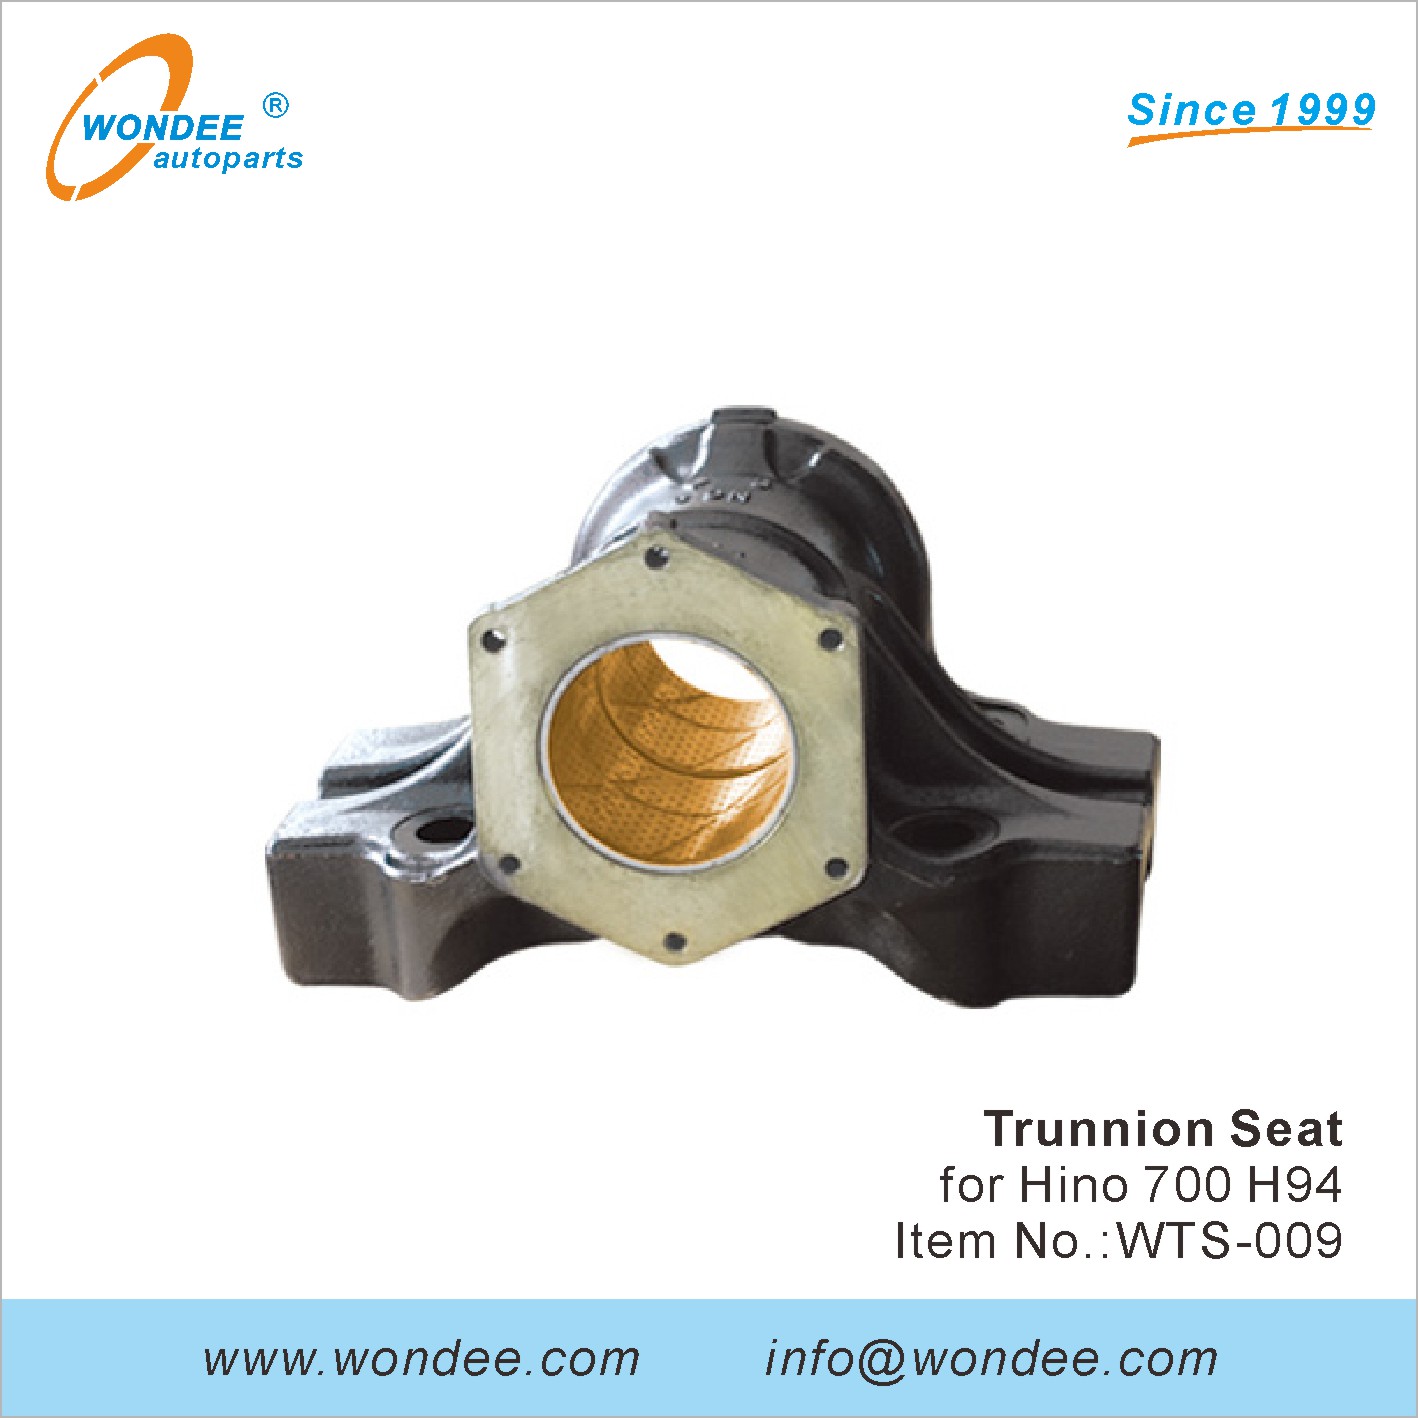 Trunnion Seats for Different Types of Trucks